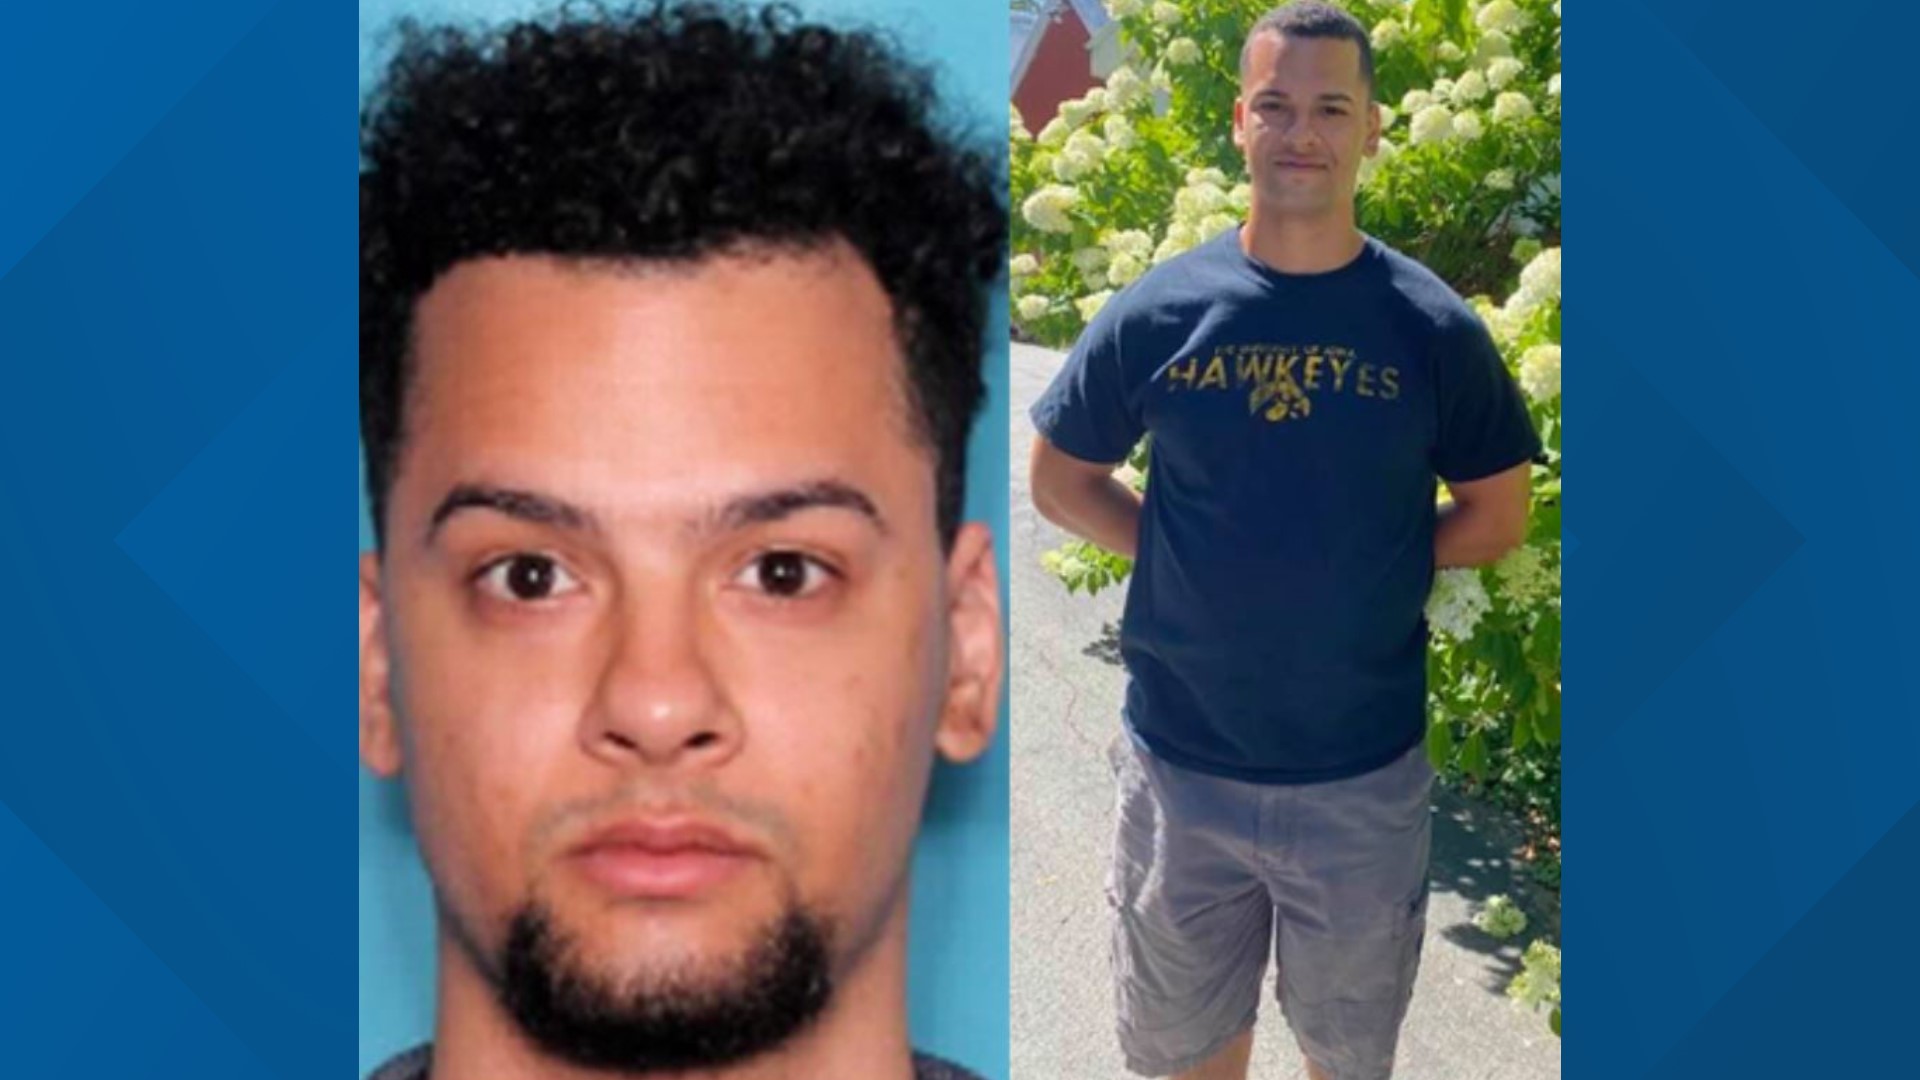 27-year-old Josh Roldan, also known as Josh Boyer, was reported missing on Sept. 2.